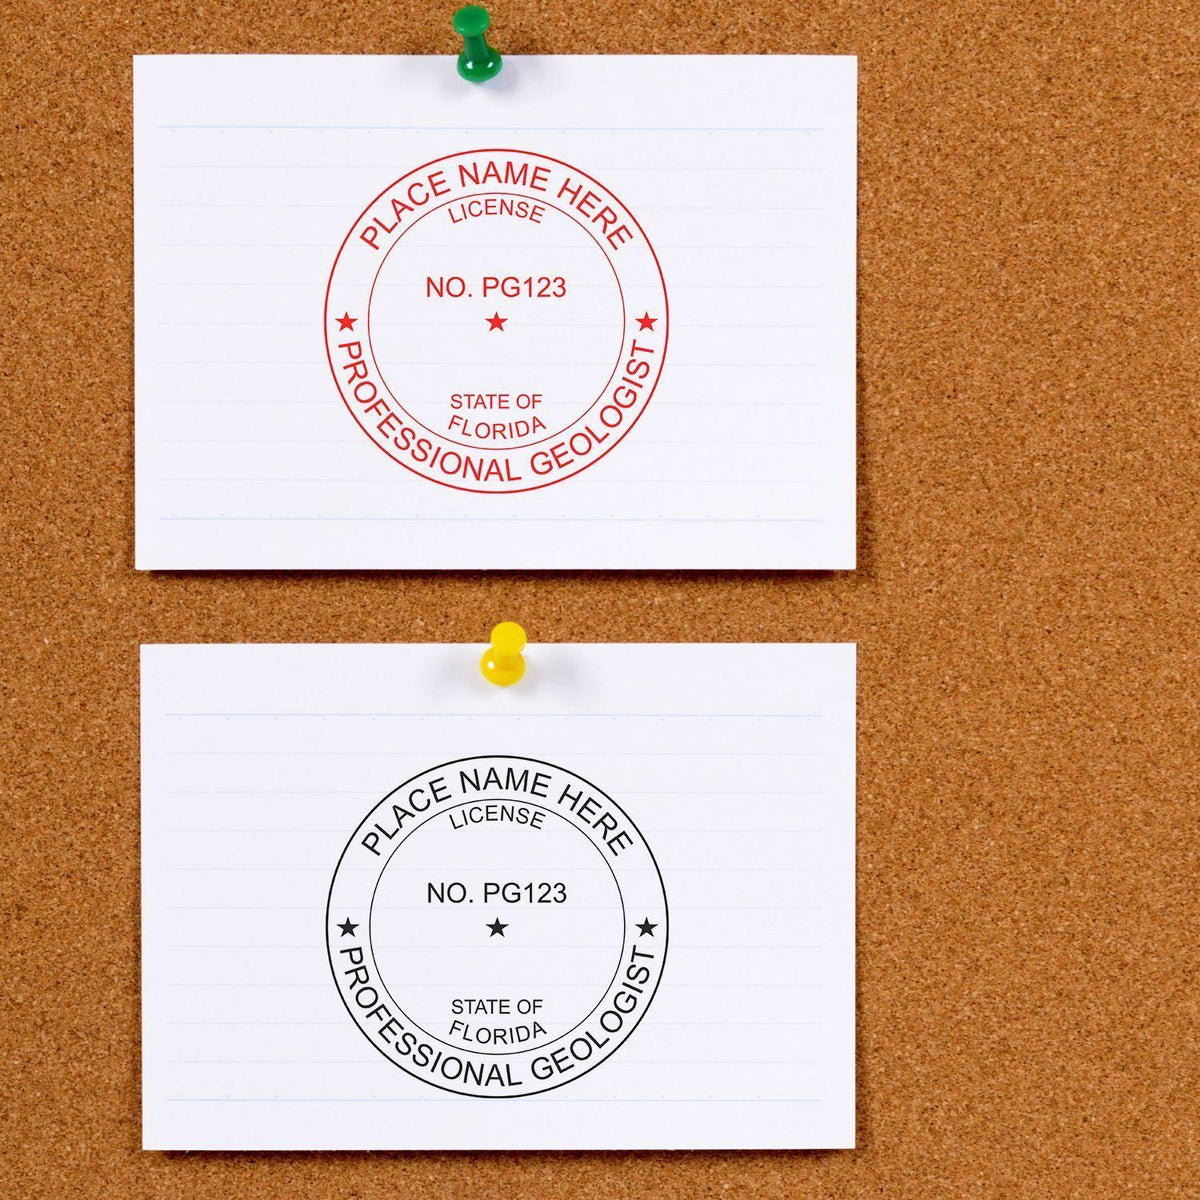 Xstamper Geologist Pre-Inked Rubber Stamp of Seal - Engineer Seal Stamps - Stamp Type_Pre-Inked, Type of Use_Professional